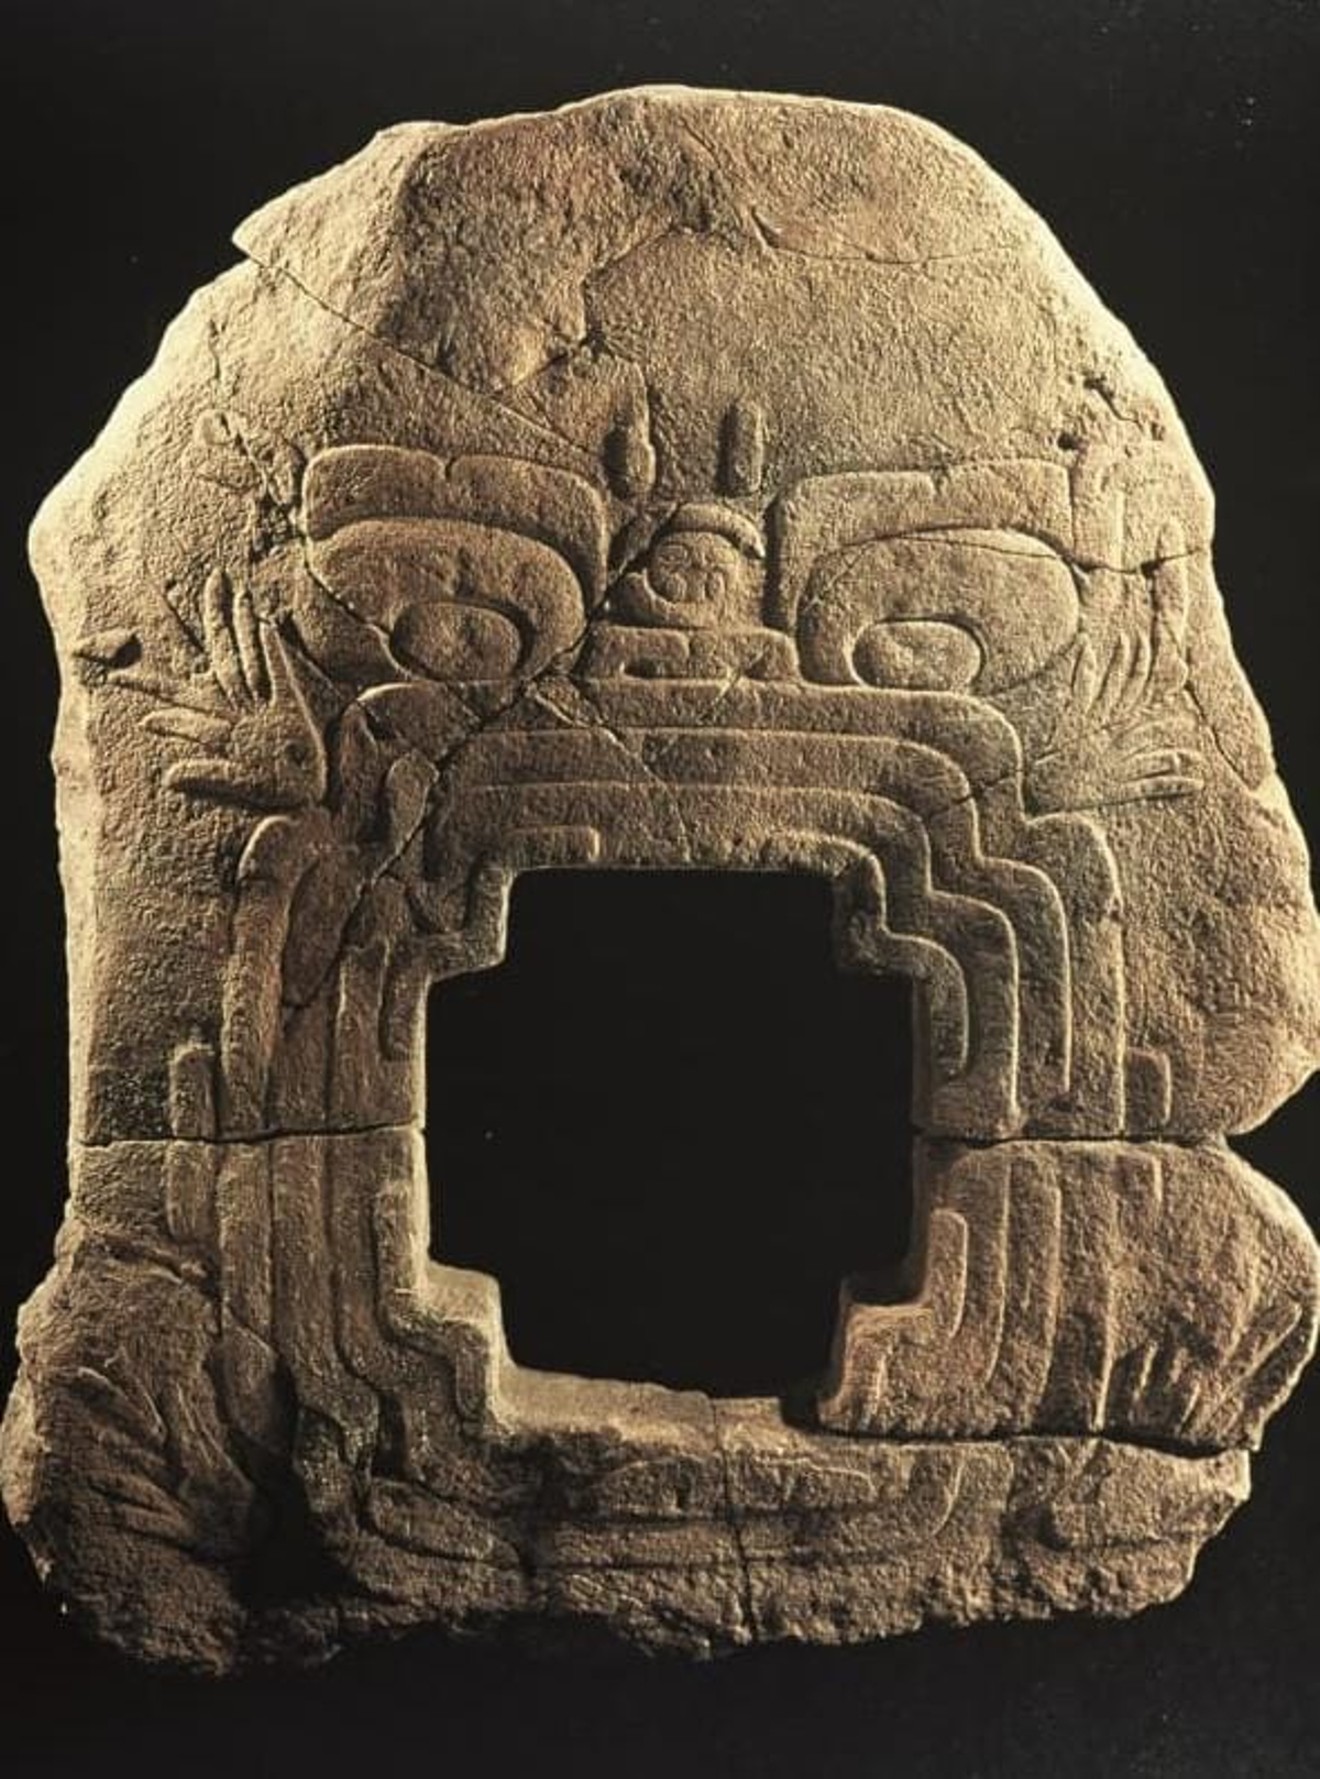 The Earth Monster is an Olmec artifact that archaeologists believe symbolizes a mythological figure and the entrance to an underworld.